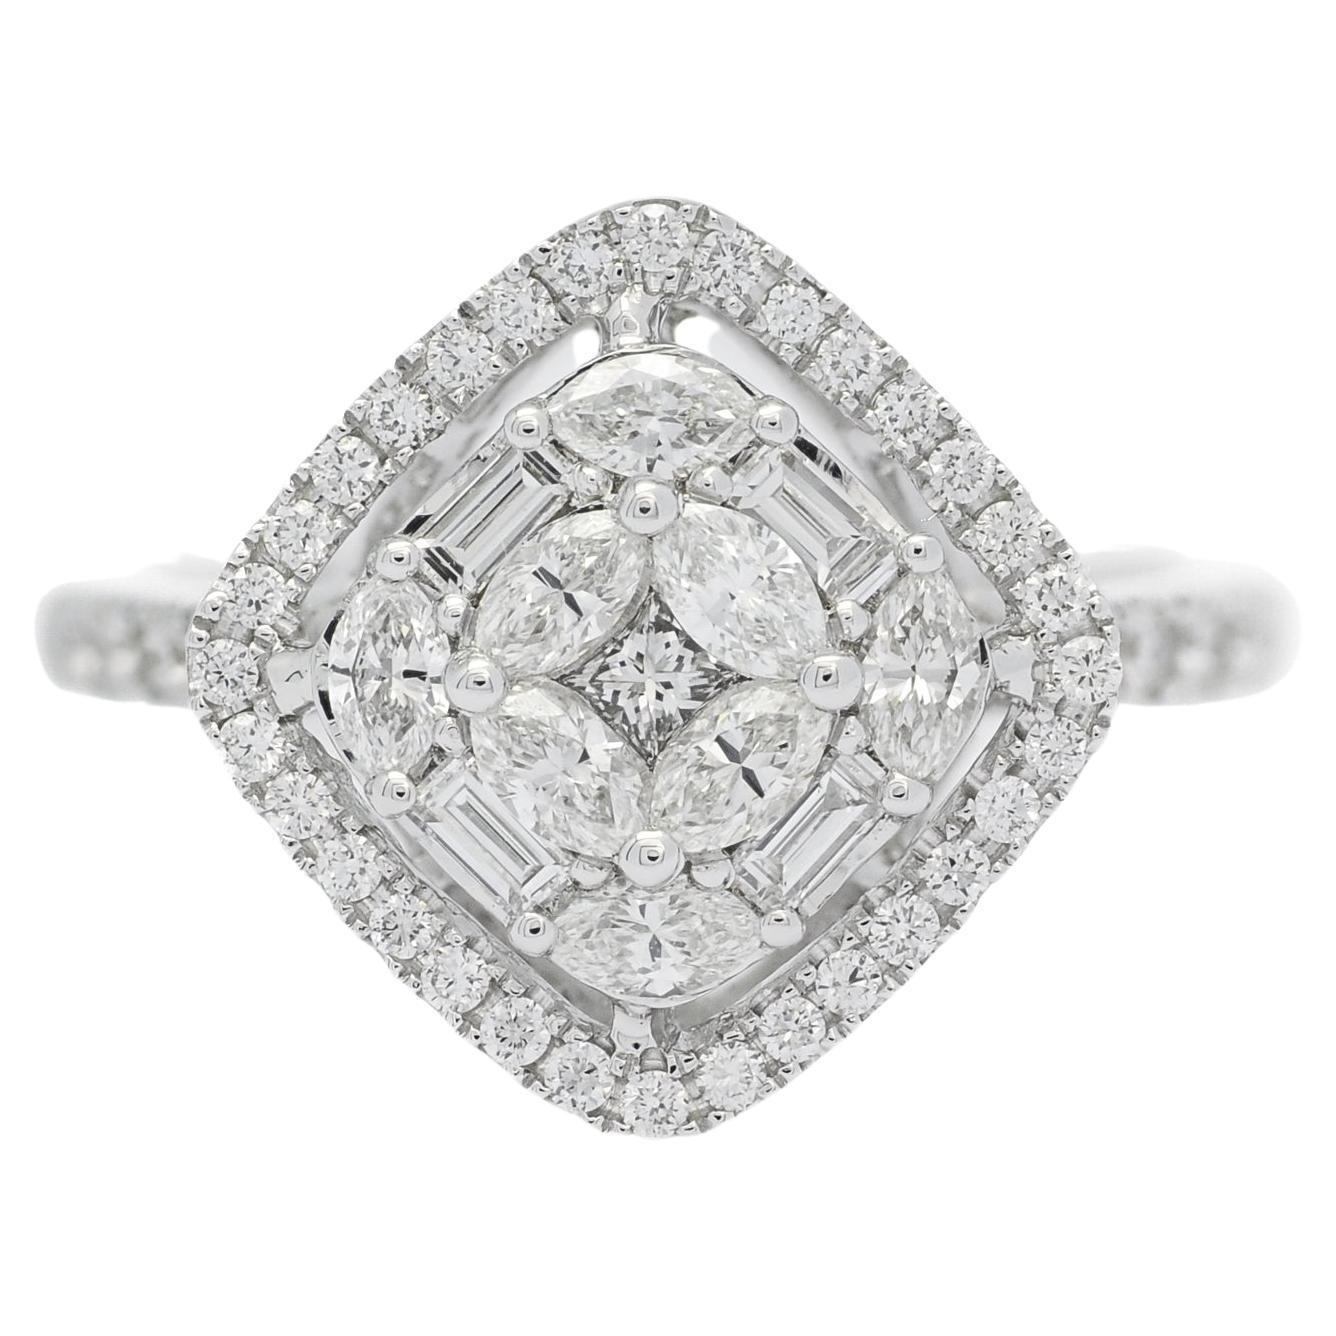  Natural Diamonds 1.00 carats 18KT White Gold Cluster Statement Ring For Sale